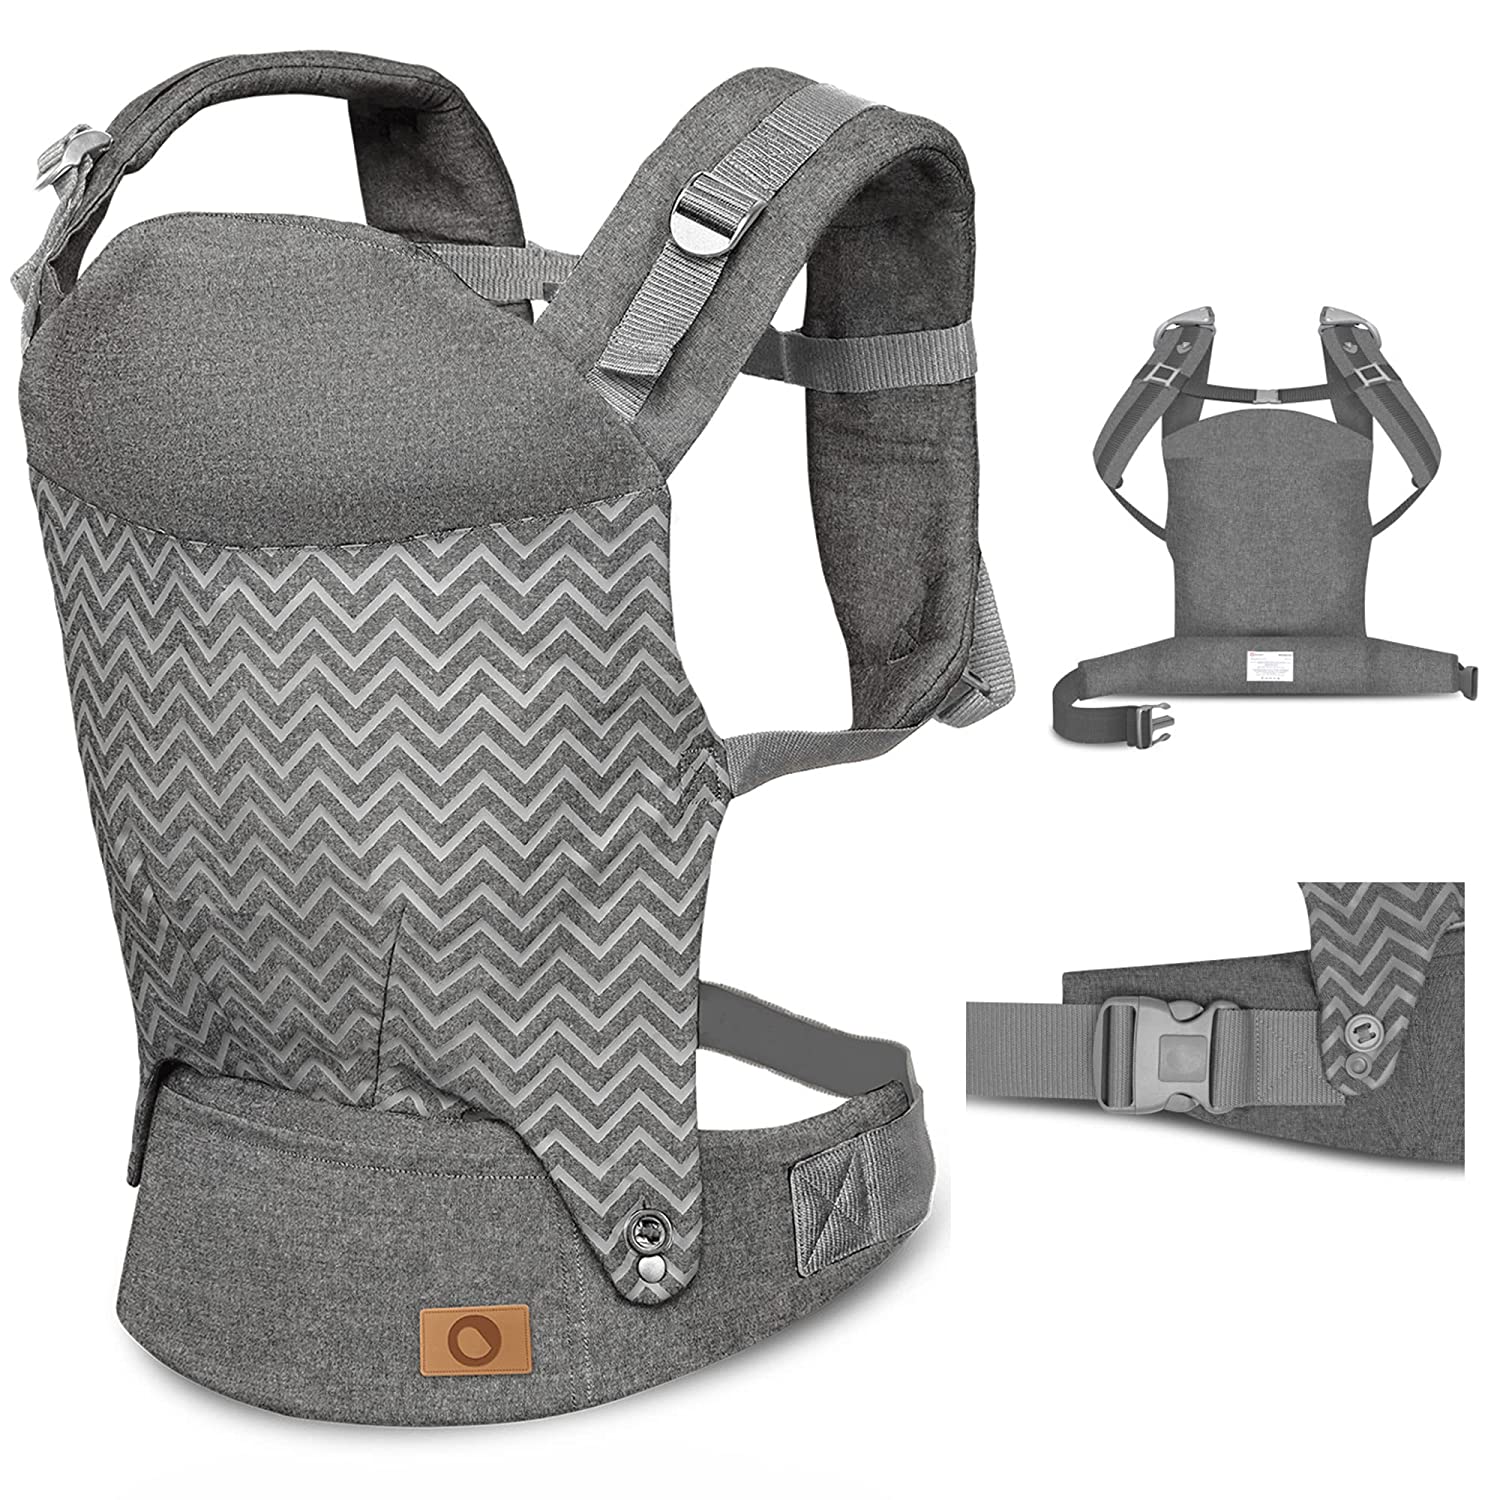 Lionelo Margareet Baby Carrier 3 Positions Correct Position of the Baby Retractable Hood Double Protection Skin-friendly Materials Belt TÜV Certificate grey